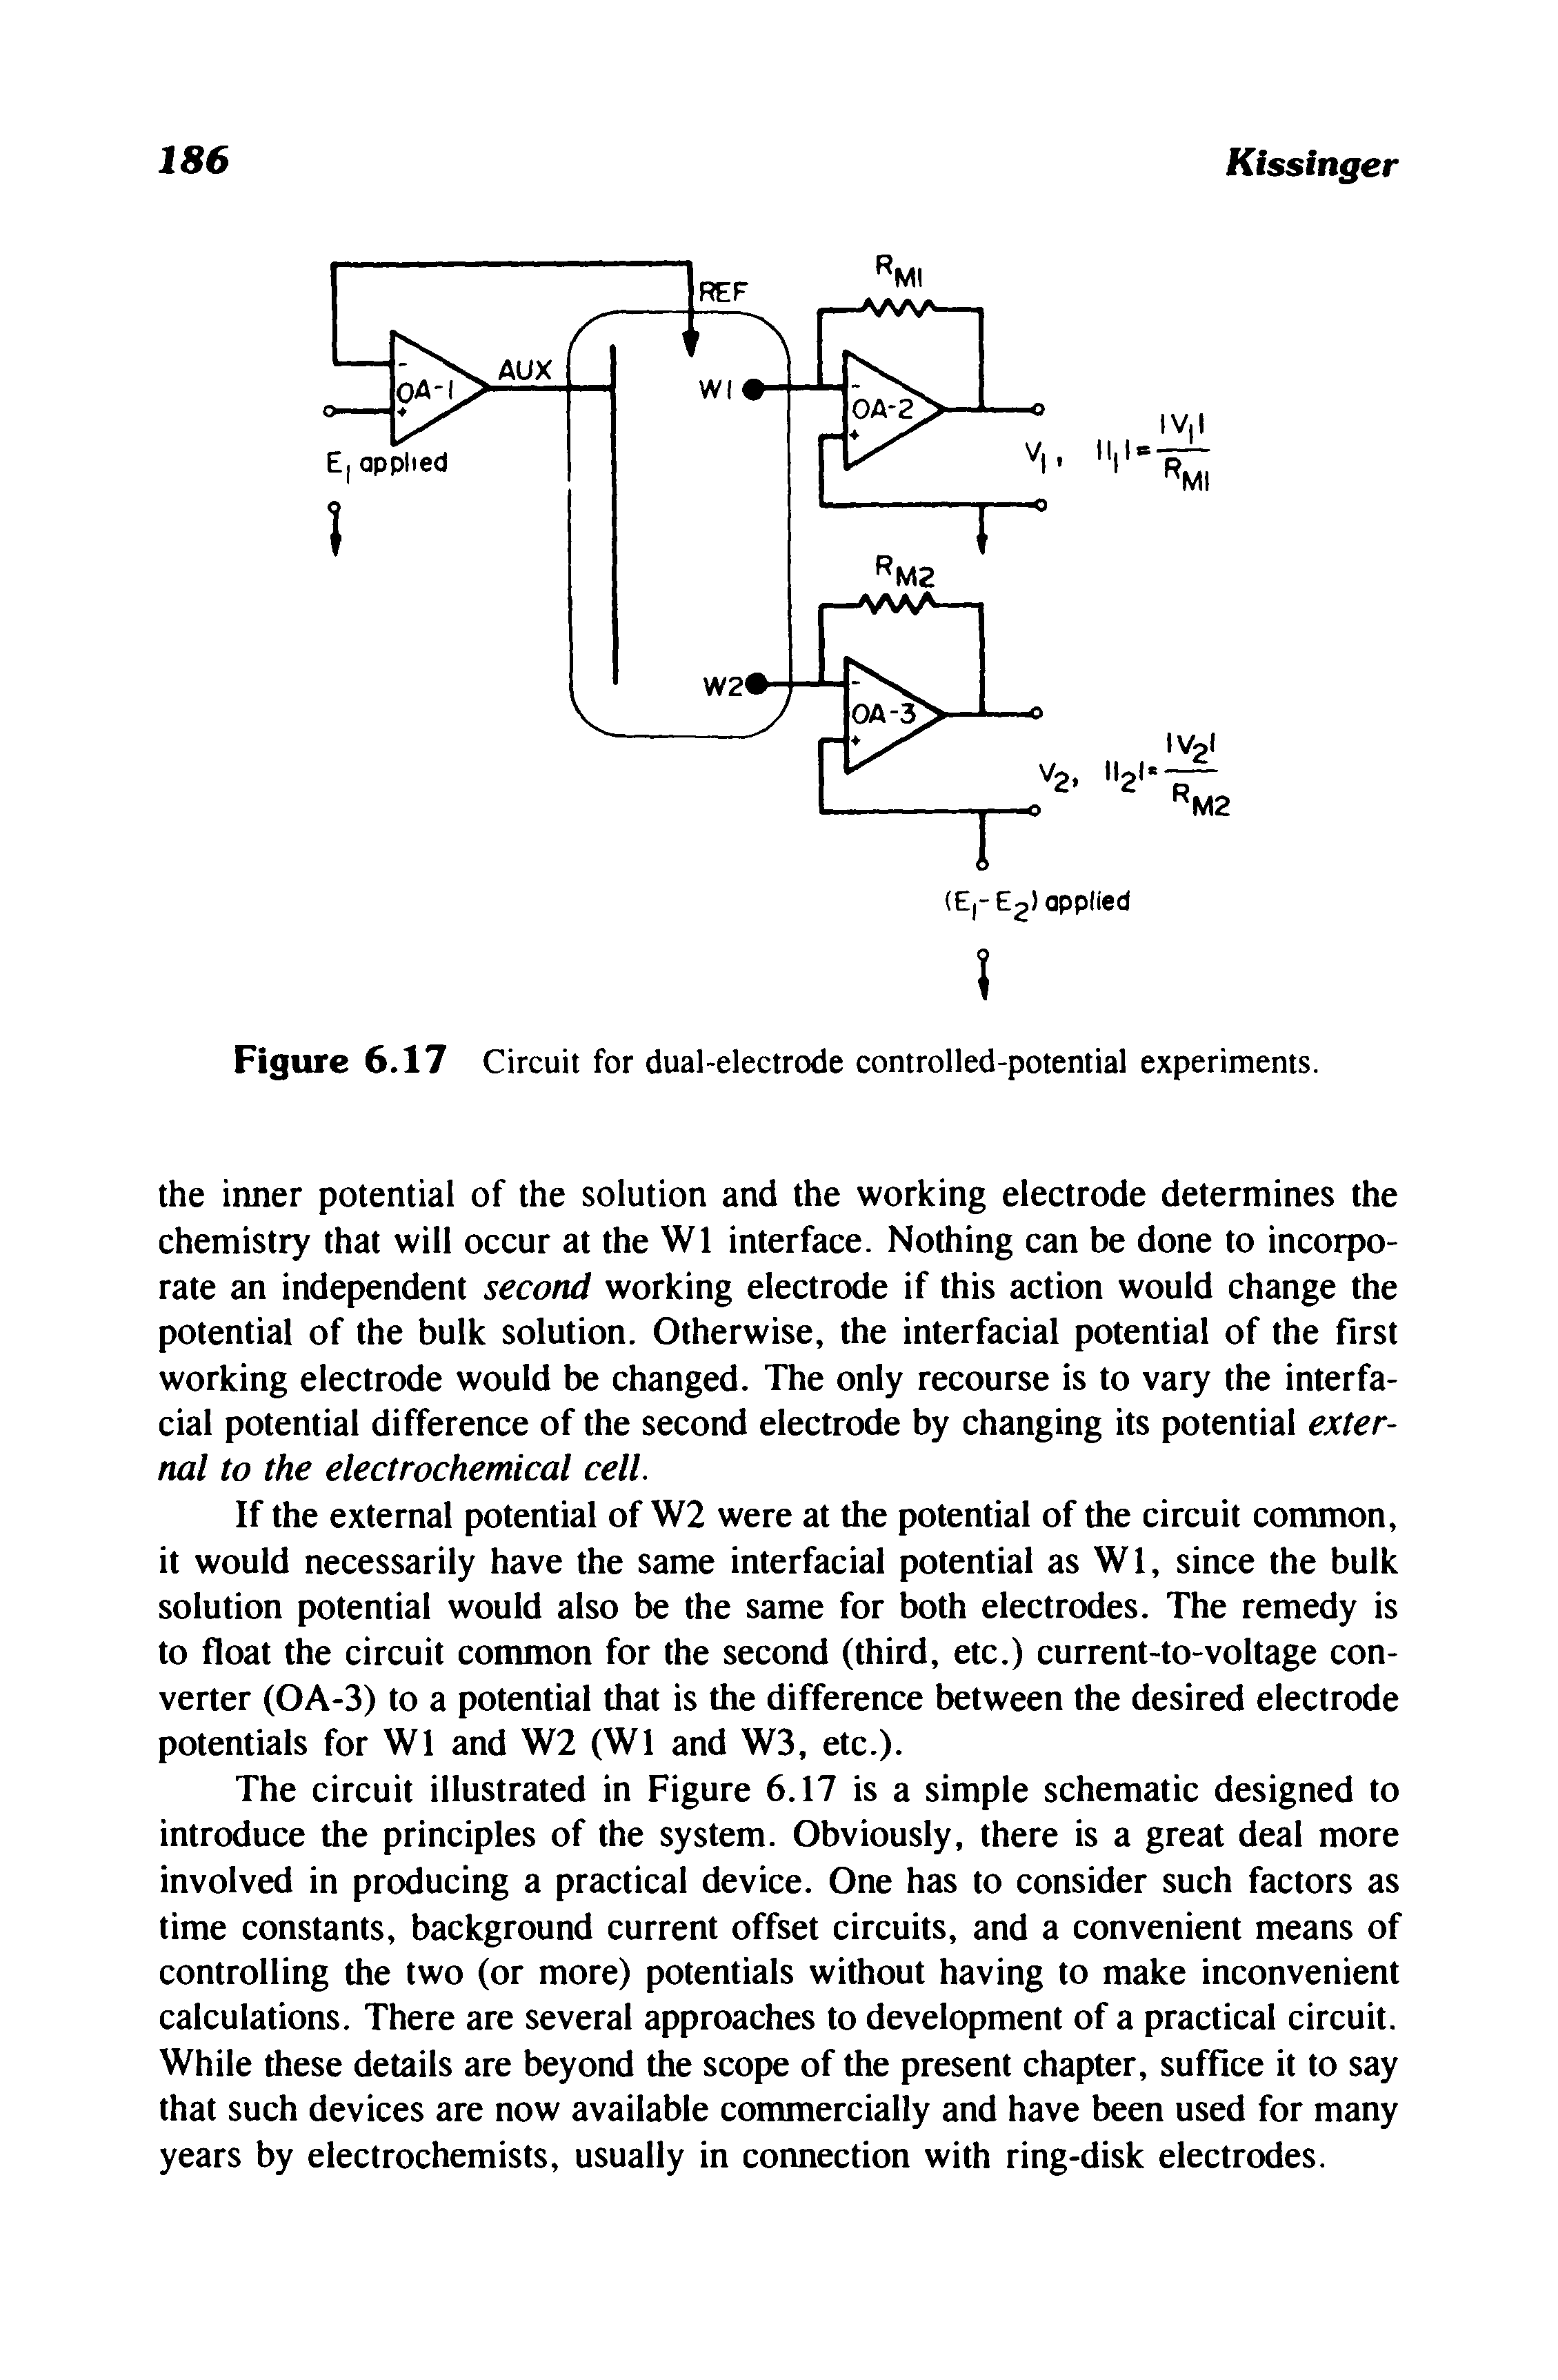 Figure 6.17 Circuit for dual-electrode controlled-potential experiments.